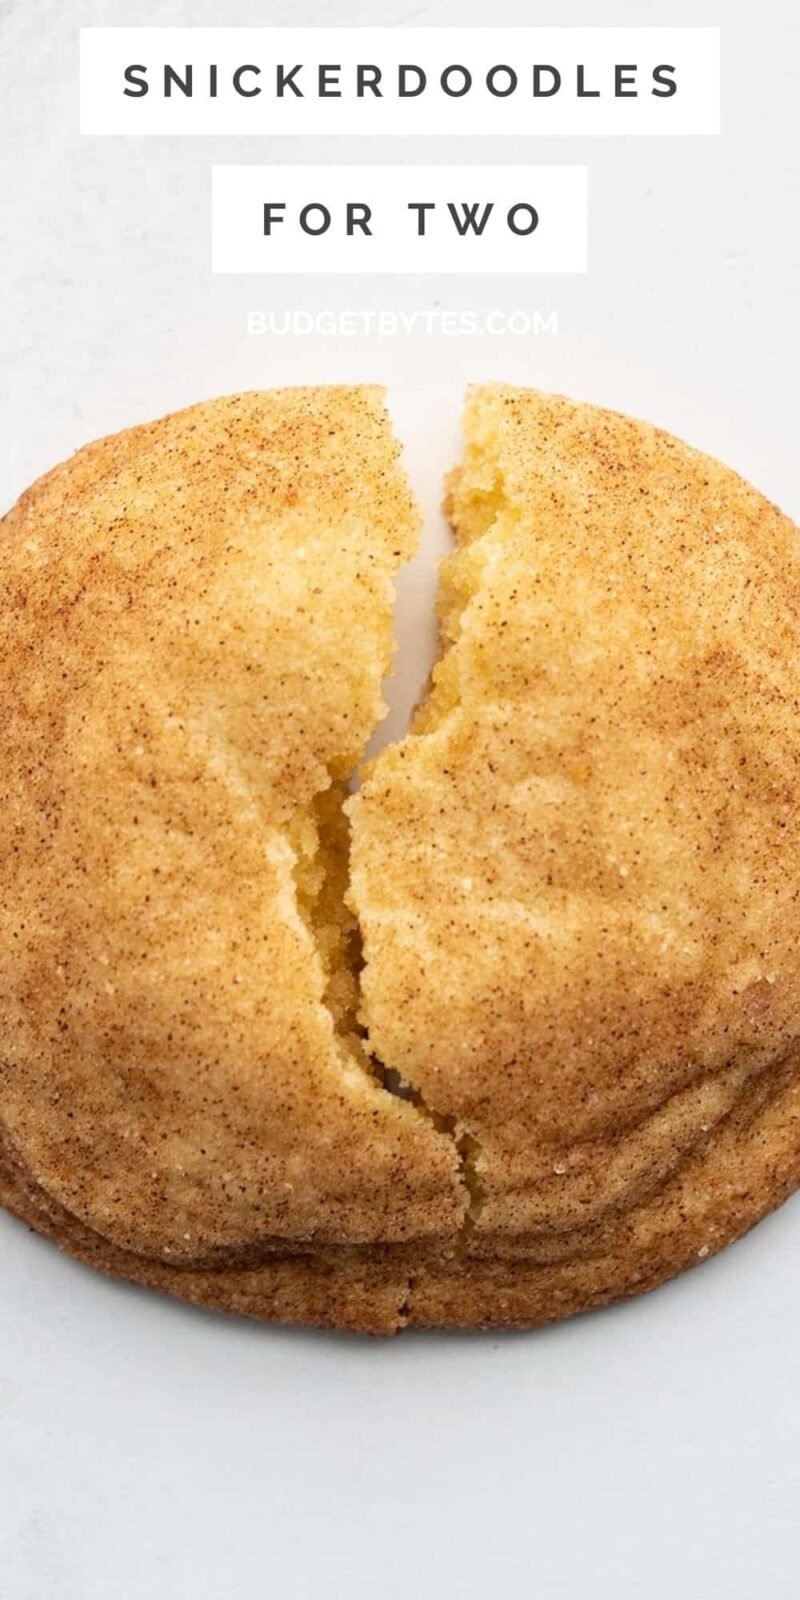 Close up of a snickerdoodle cookie broken in half, title text at the top